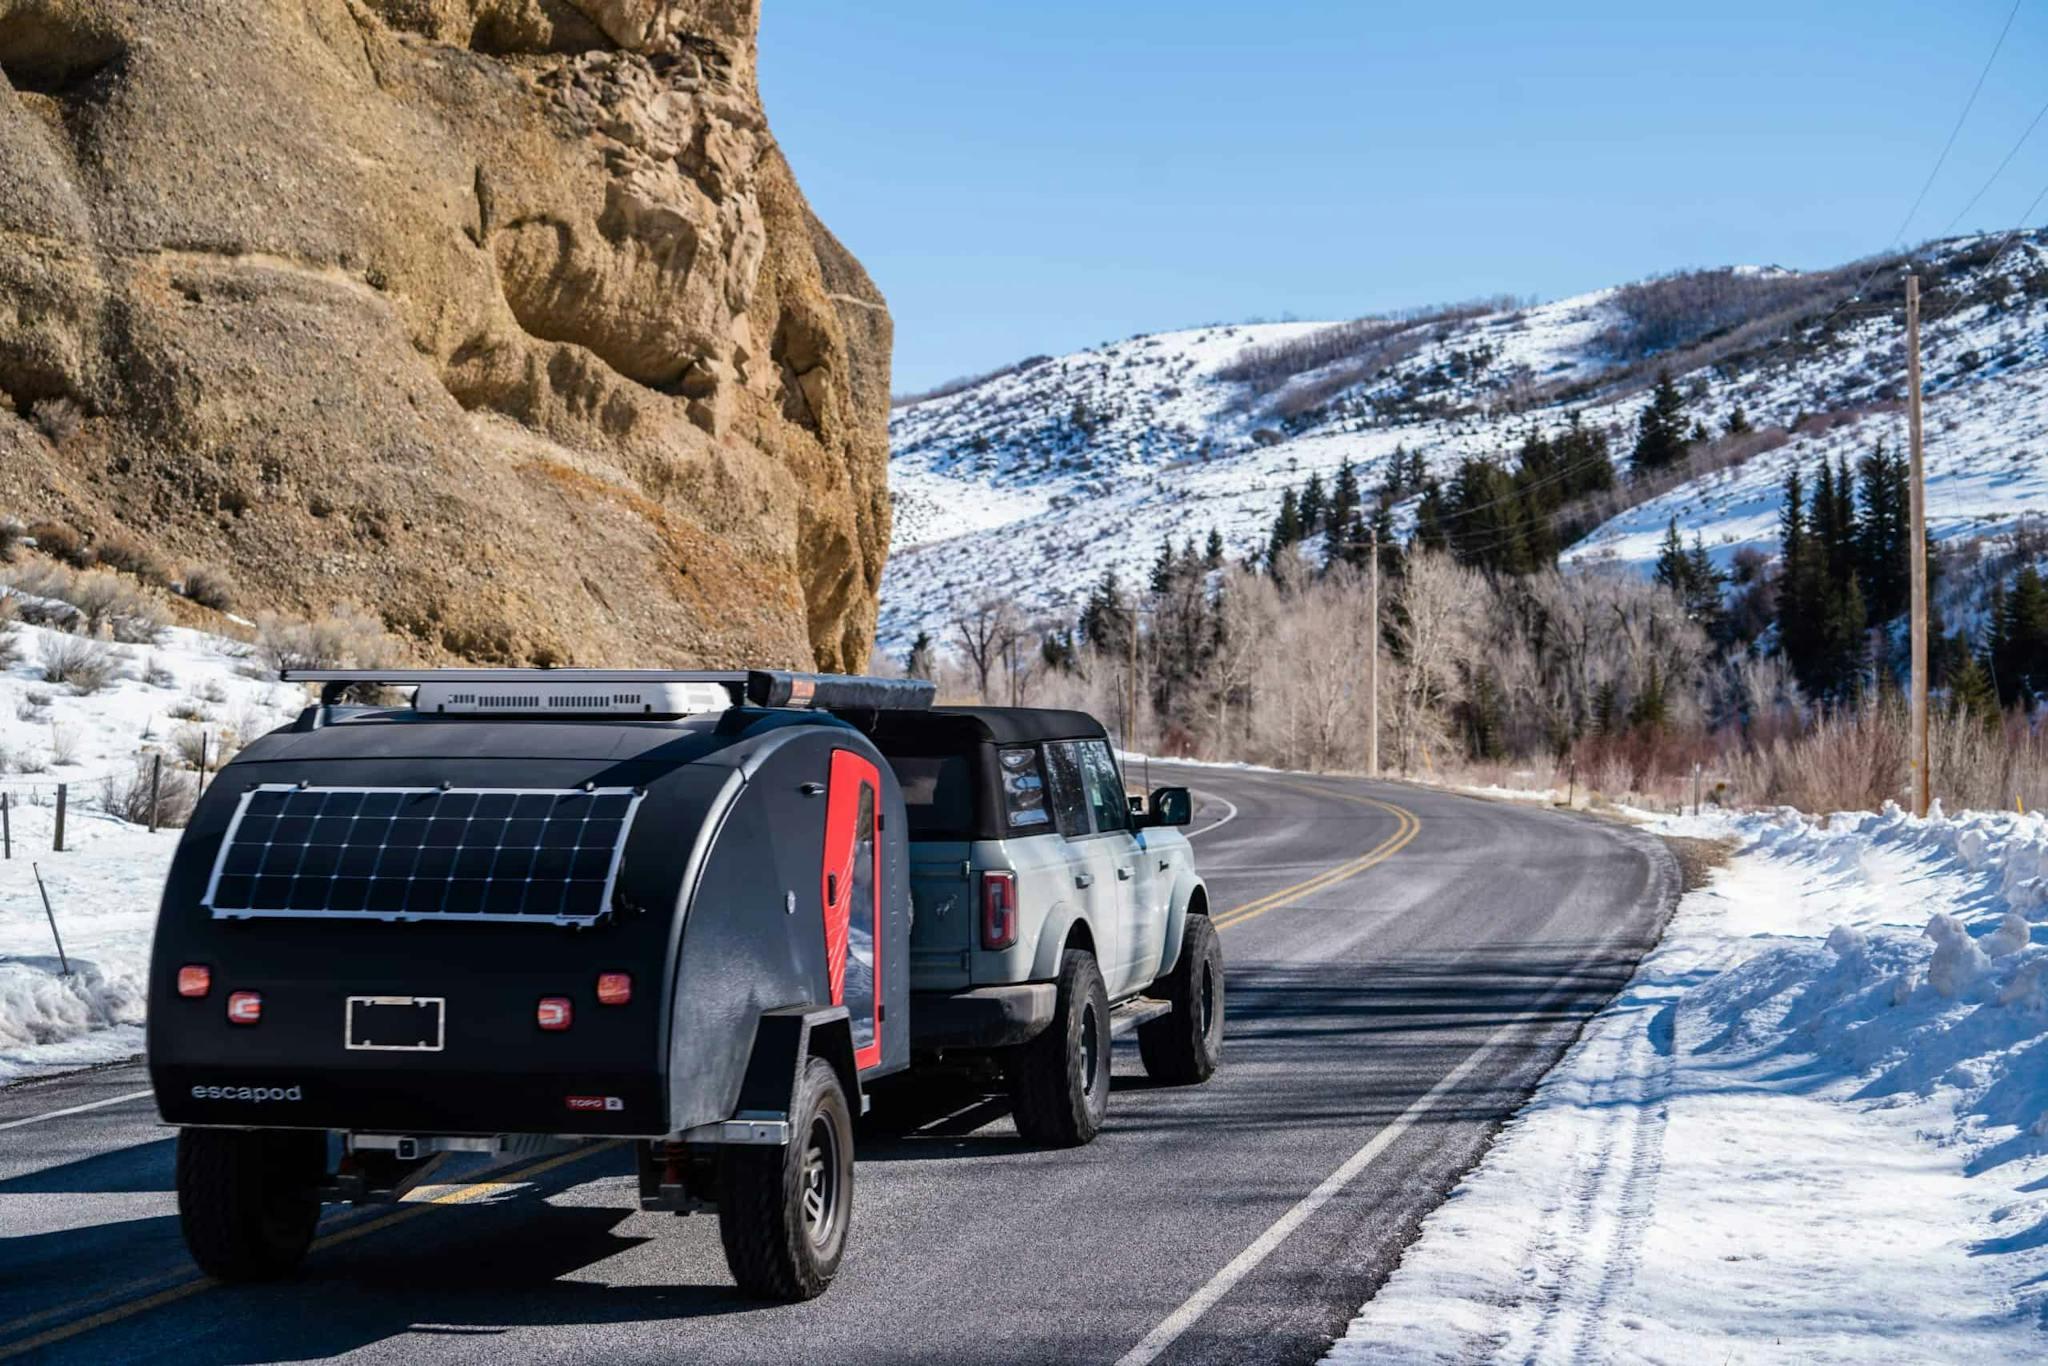 A Bronco is towing a navy blue teardrop camper with a red door down a paved snowy road.